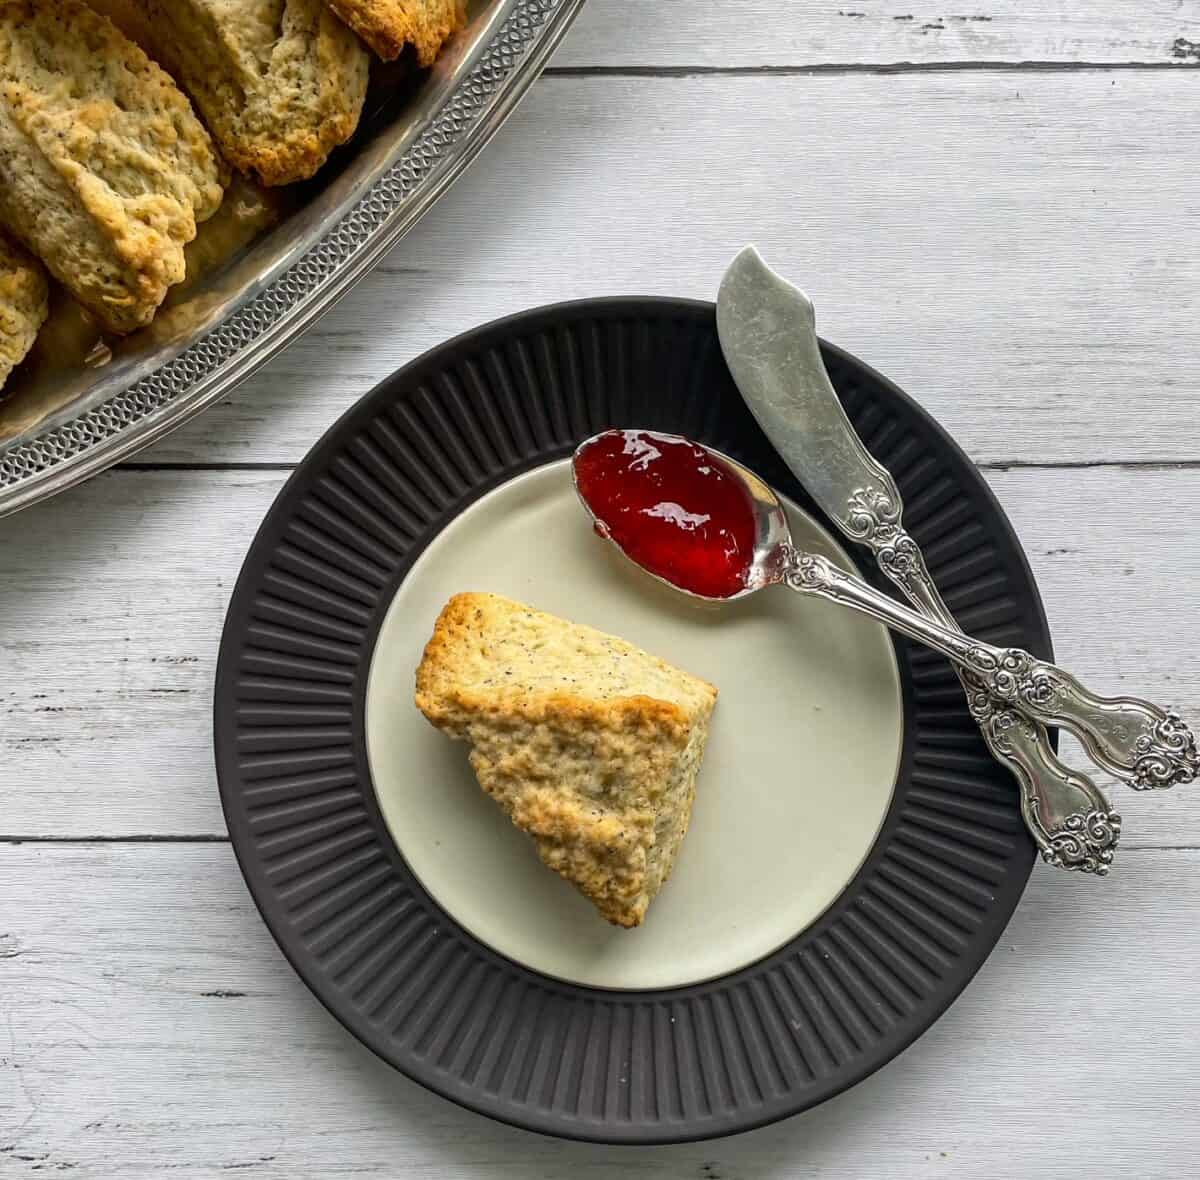 earl grey scone on a plate with knife and spoon with red jam.